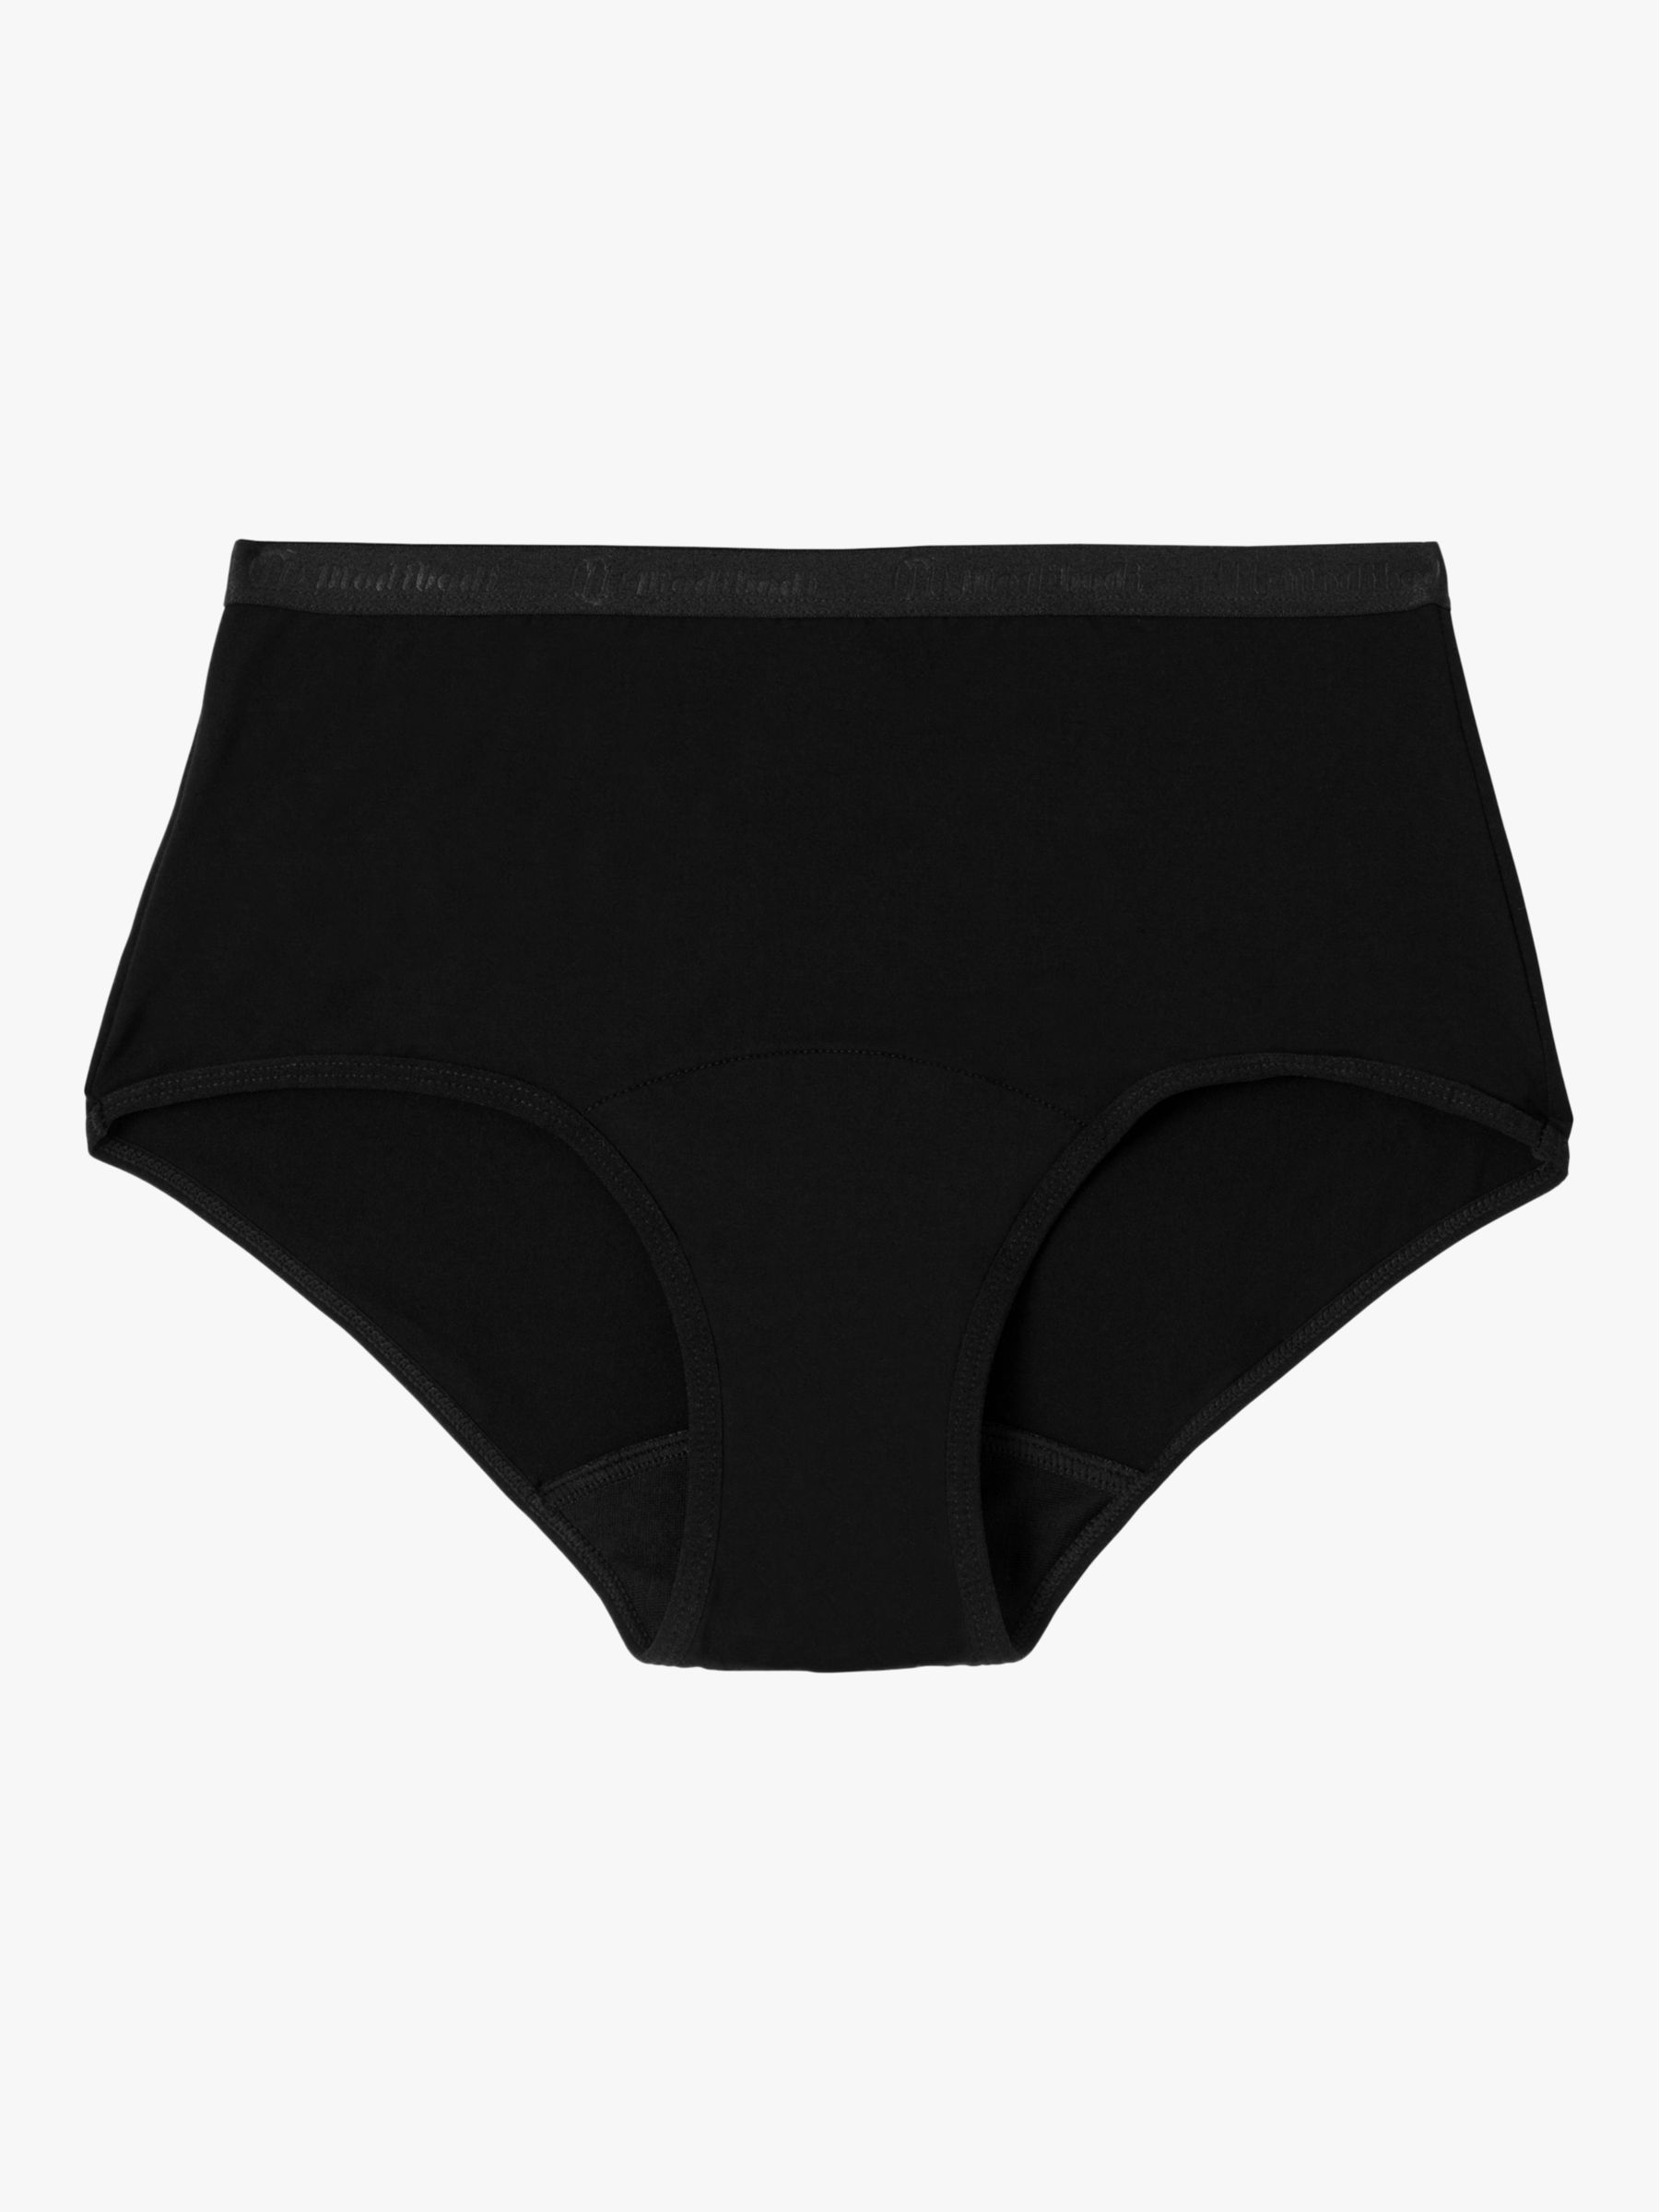 Modibodi Classic Full Brief Light to Moderate Absorbency Knickers, Black, 10